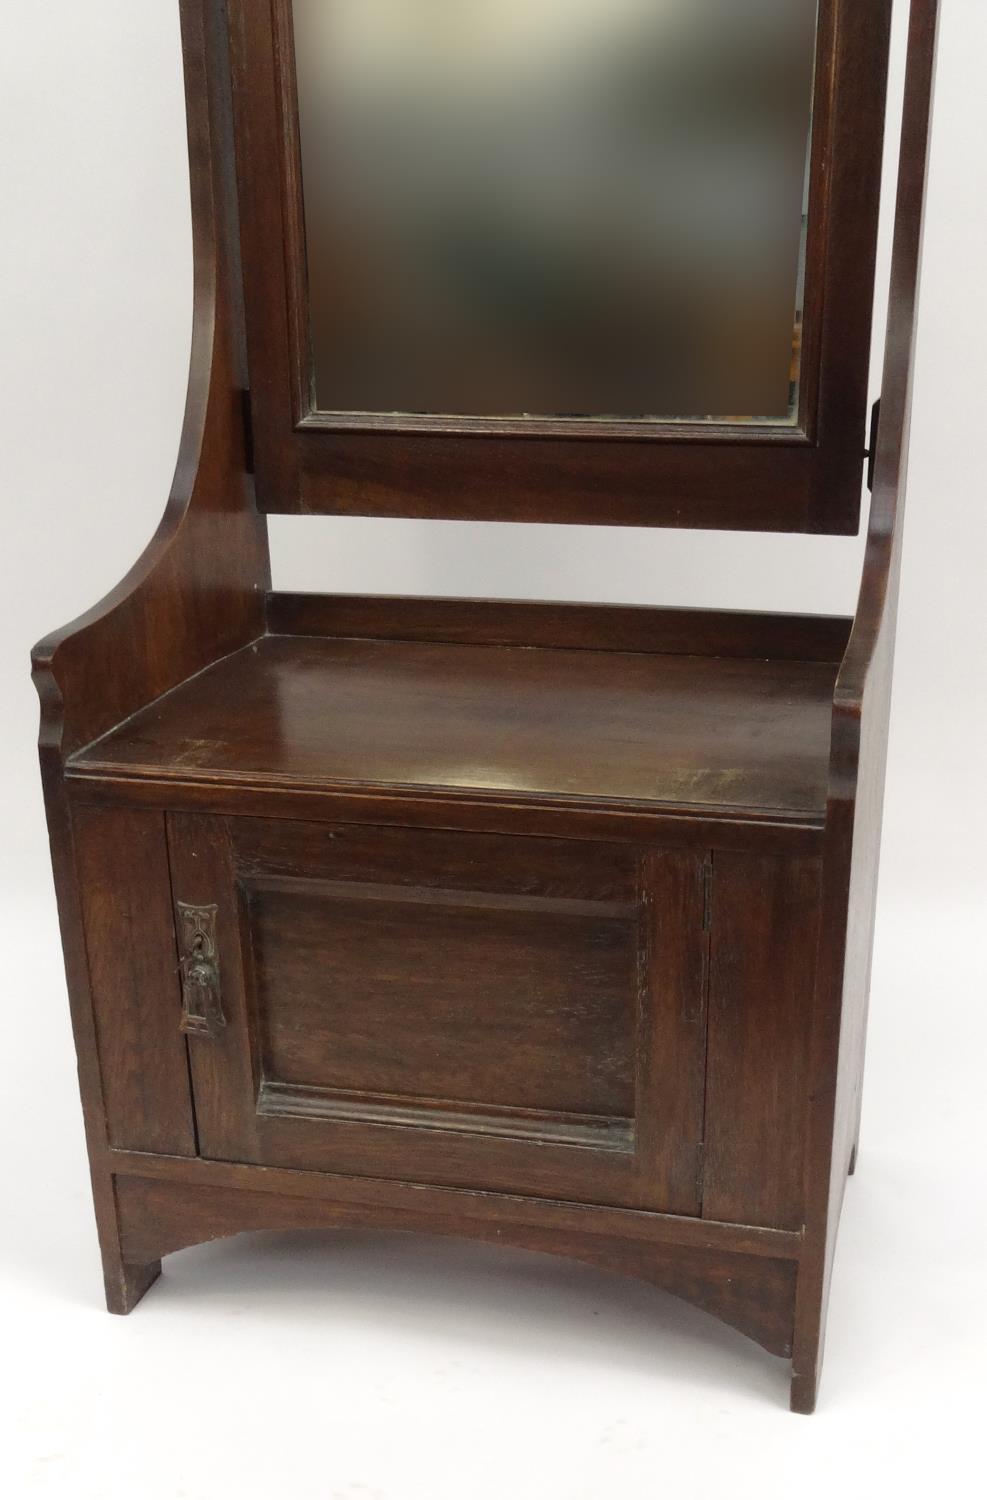 Arts and crafts oak hall mirror with brass plaque and cupboard base, 180cm high x 61cm wide x 43cm - Image 3 of 5